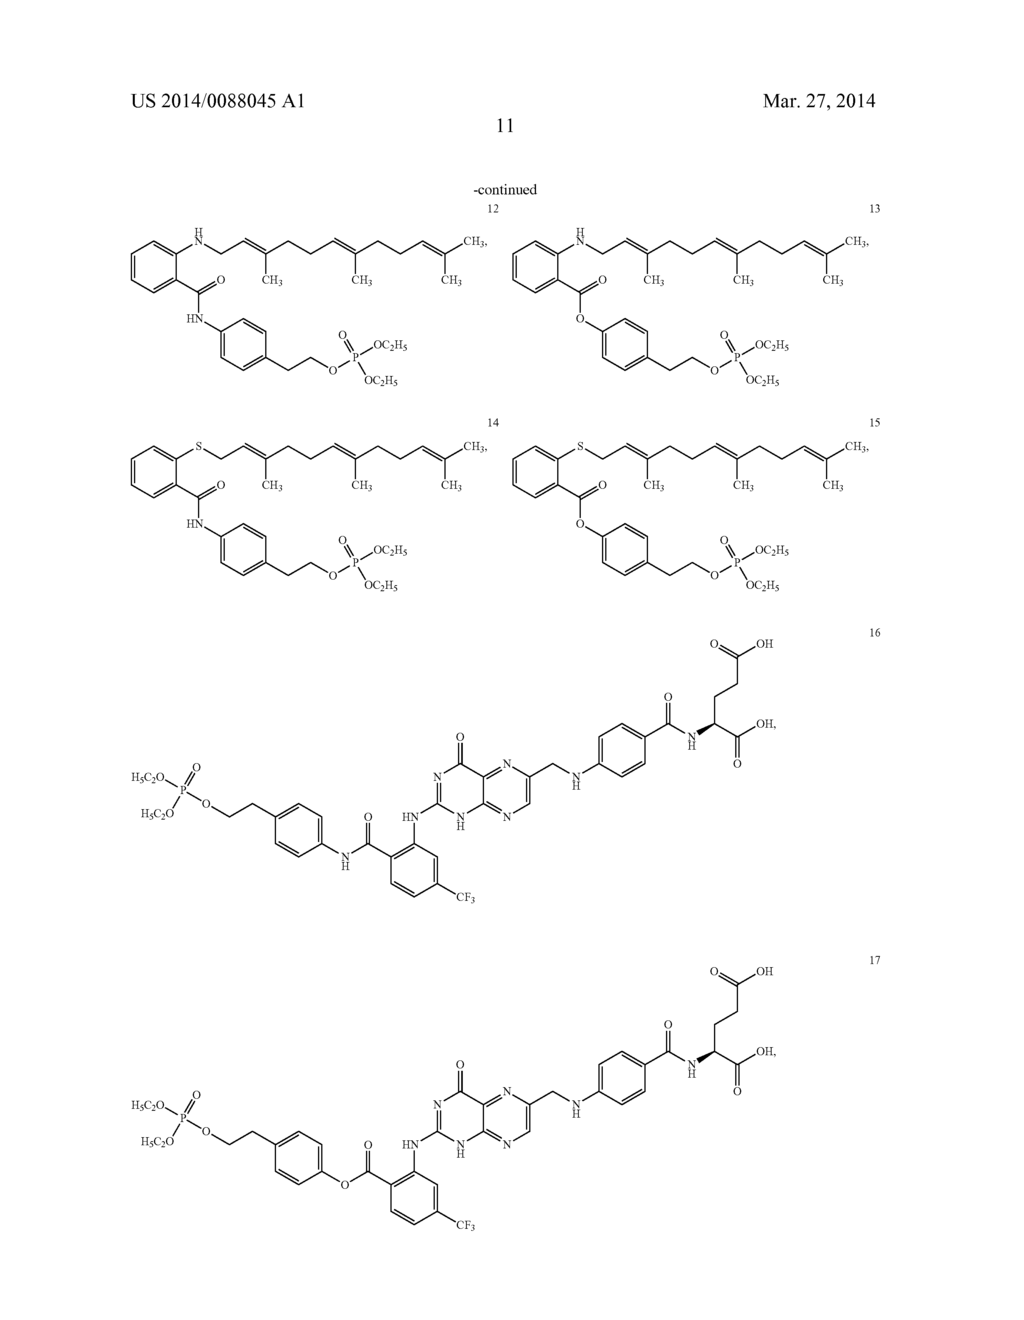 PRODUCT COMPRISING A NICOTINE-CONTAINING MATERIAL AND AN ANTI-CANCER AGENT - diagram, schematic, and image 26